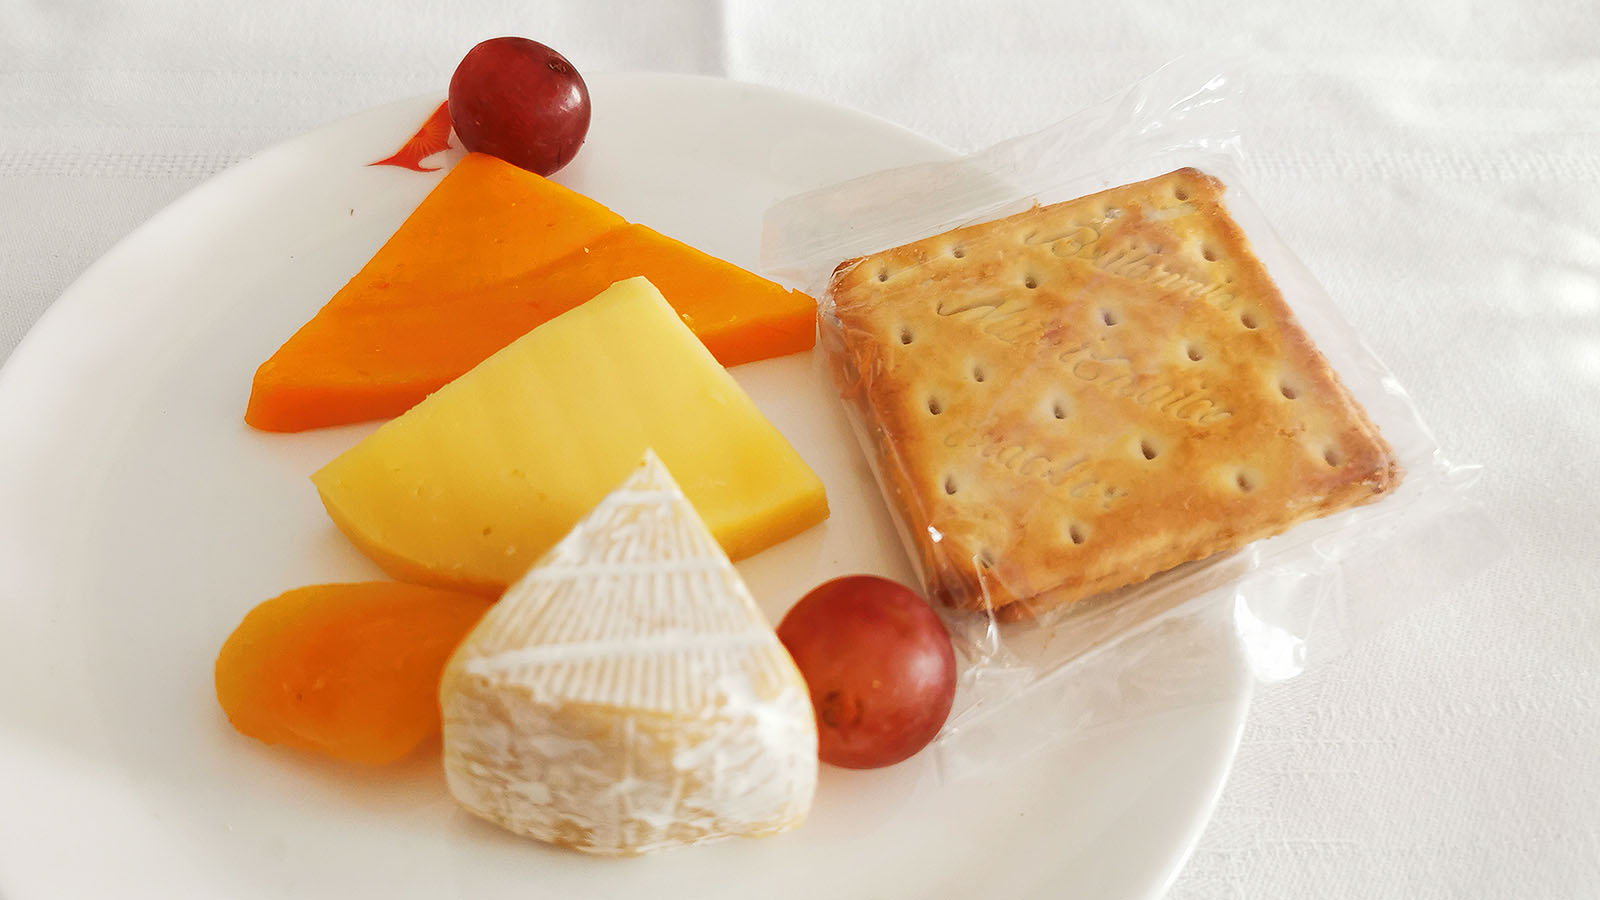 Cheese and crackers in Air India's Boeing 787 Business Class